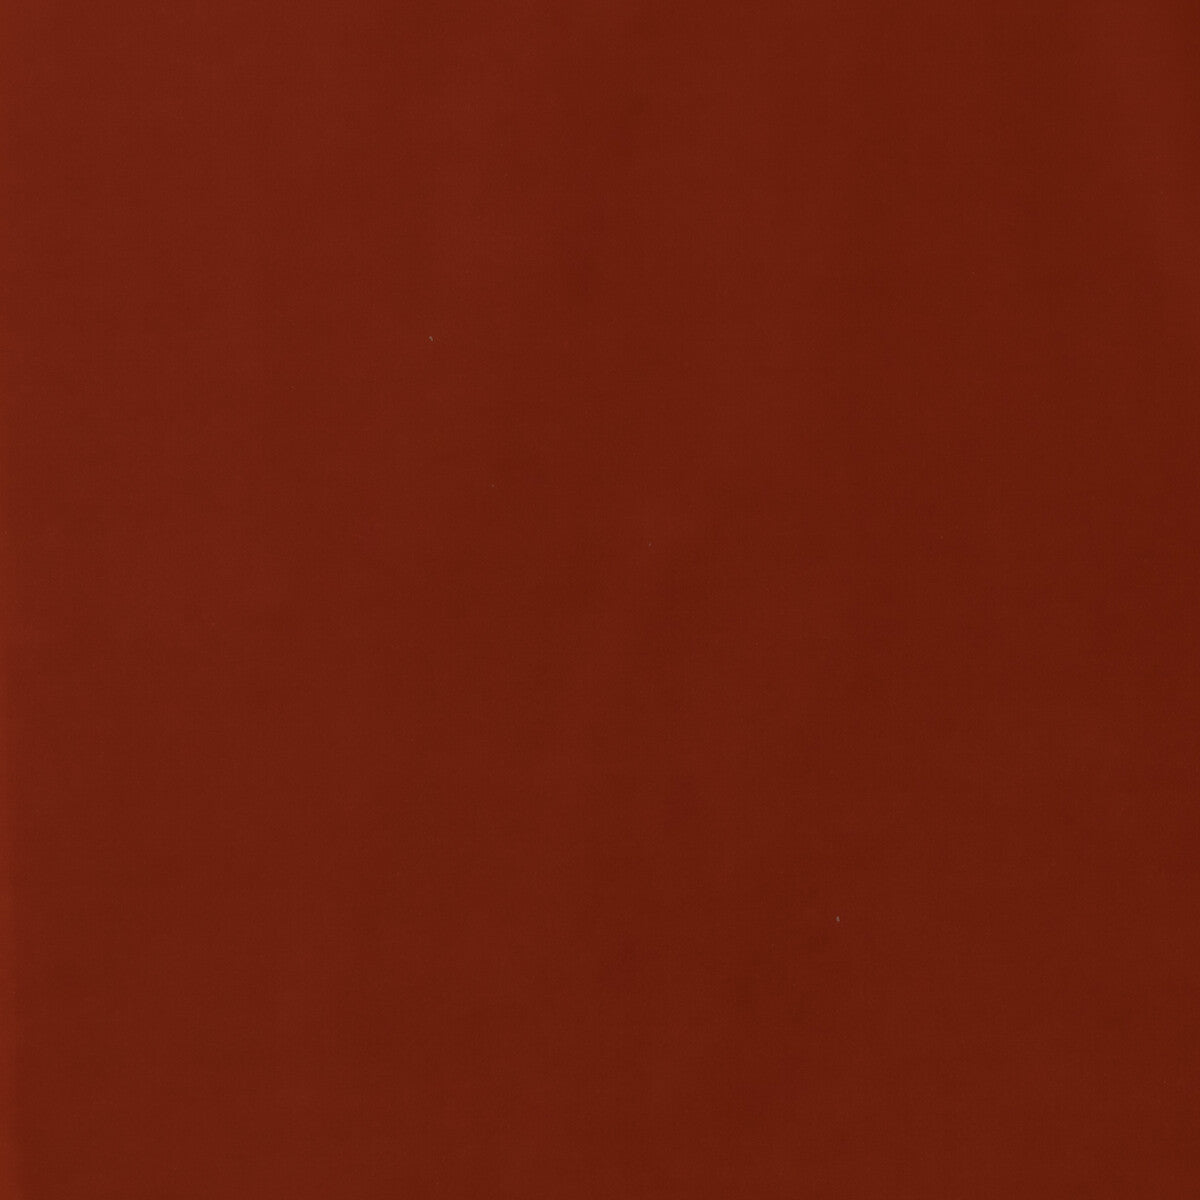 Mulberry Velvet fabric in russet color - pattern FD800.V55.0 - by Mulberry in the Mulberry Velvet collection